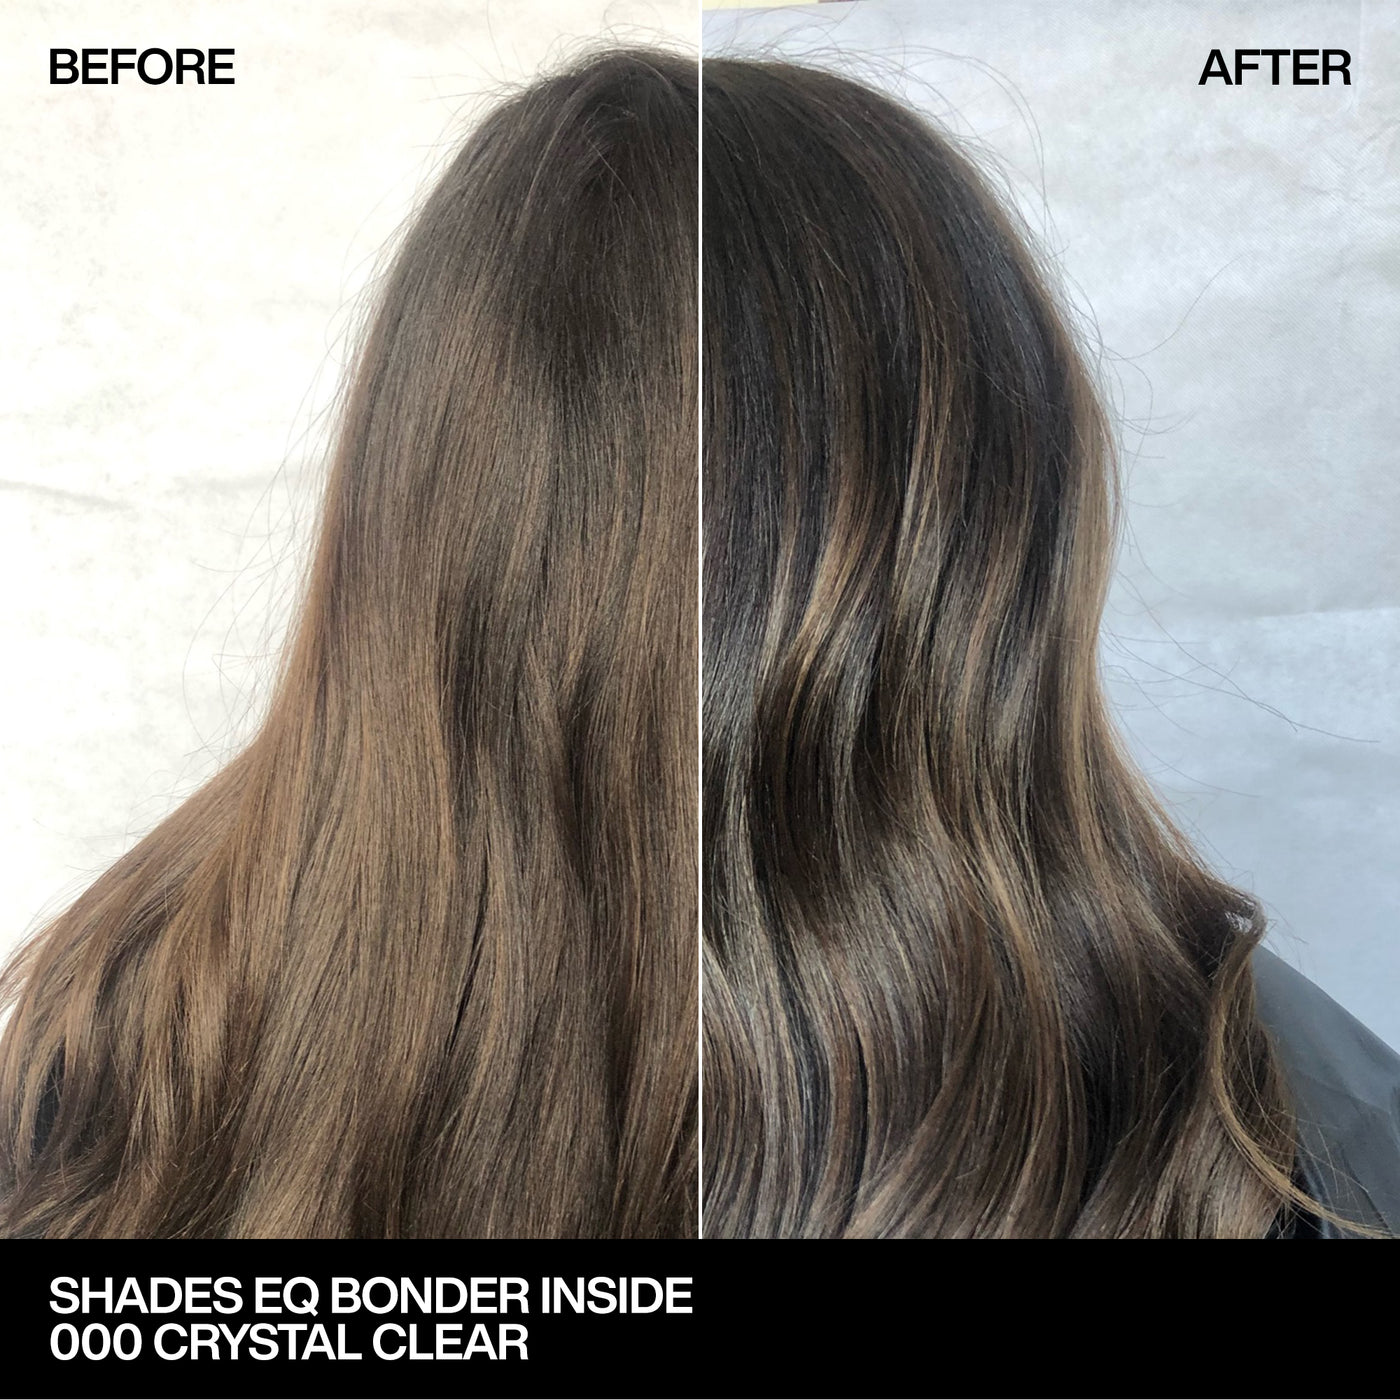 Redken Shades EQ Bonder Inside Demi-Permanent Hair Gloss (60ml) 000 crystal clear before after